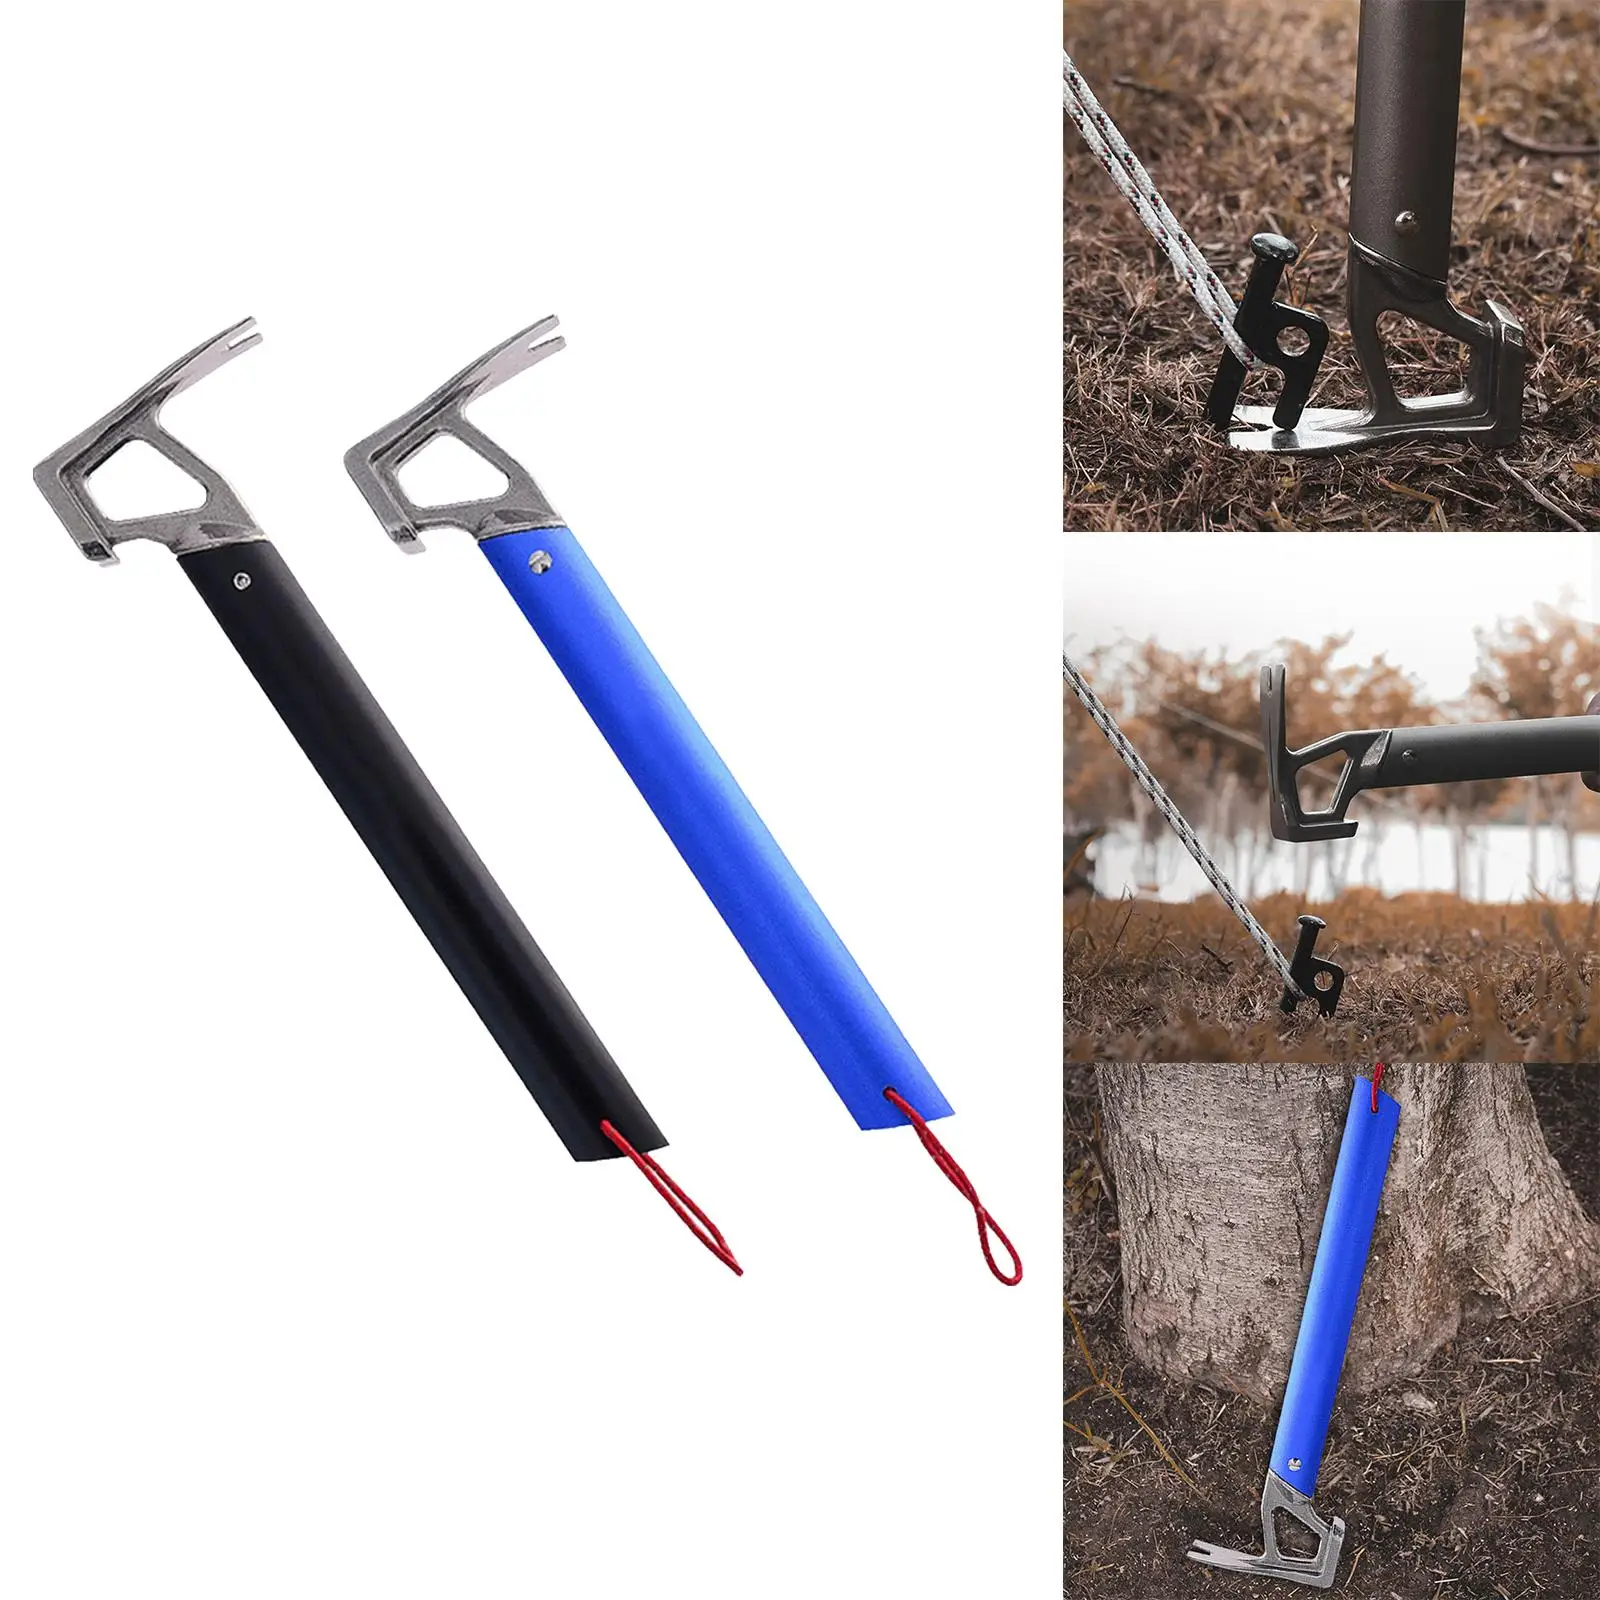 Tent Stake Extractor Puller Aluminum Handle Portable Outdoor Camping Hammer for Hiking Backpacking Climbing Gardening Hunting